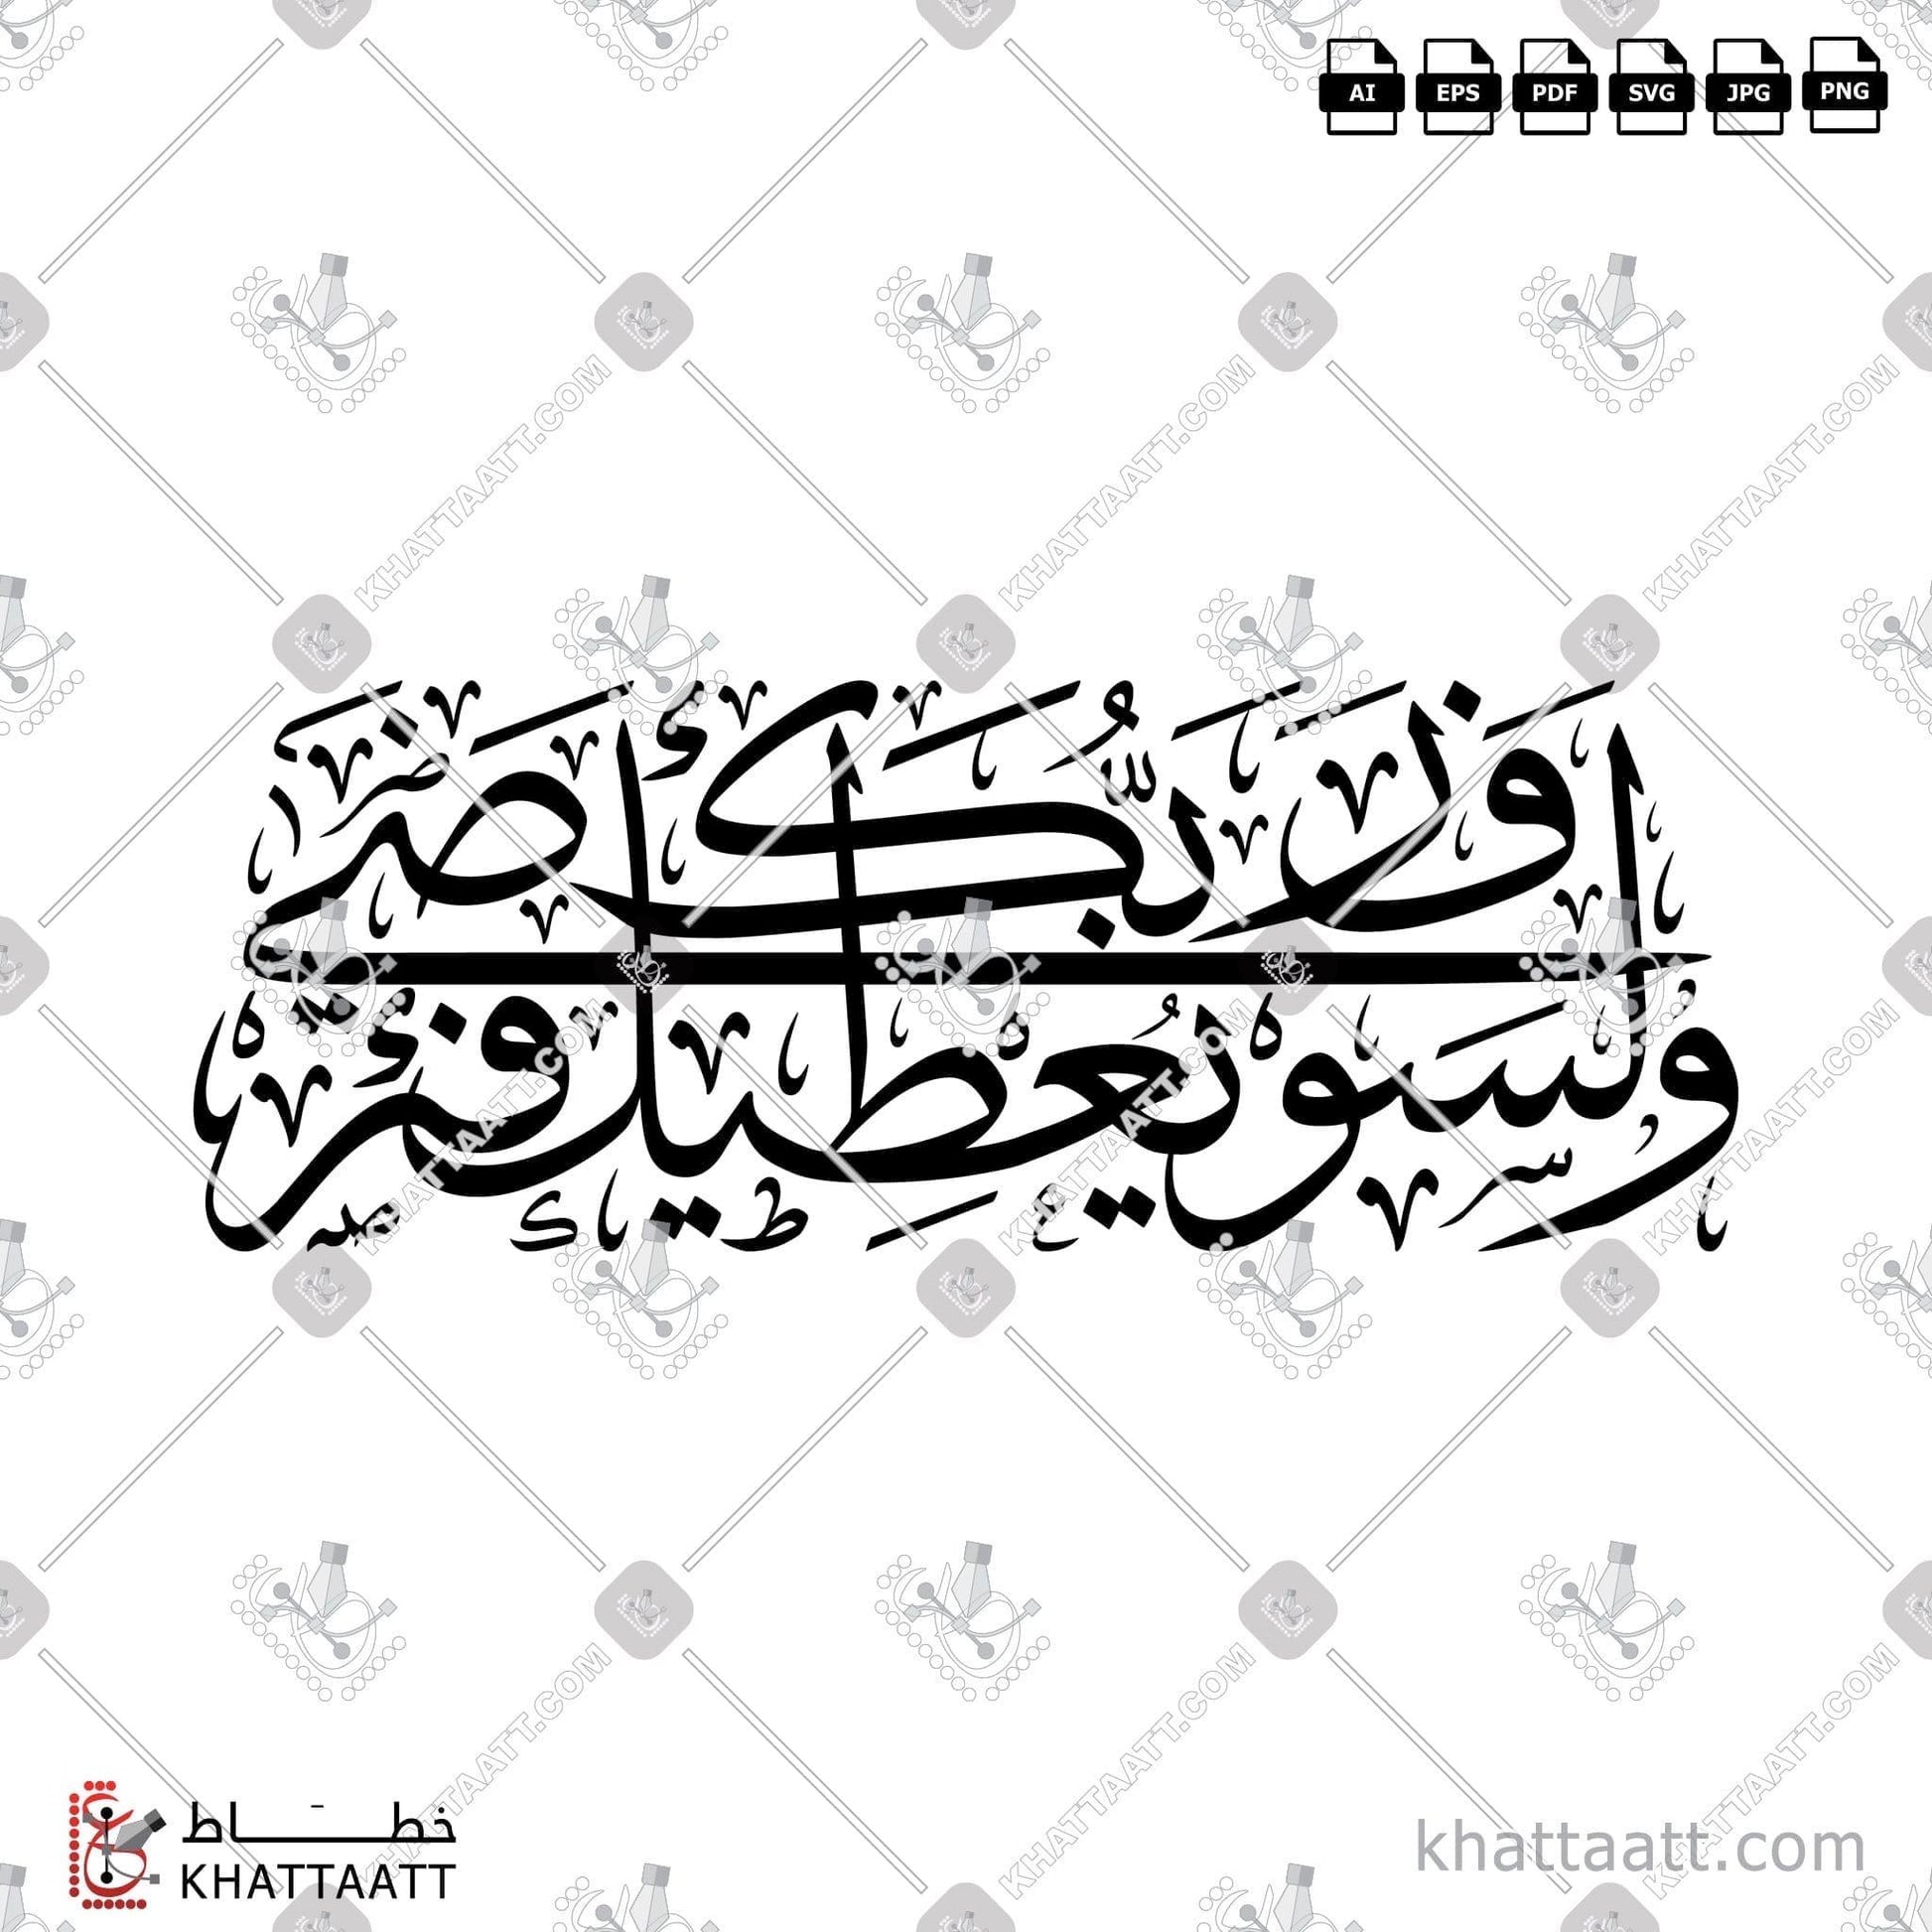 Download Arabic Calligraphy of ولسوف يعطيك ربك فترضى in Thuluth - خط الثلث in vector and .png